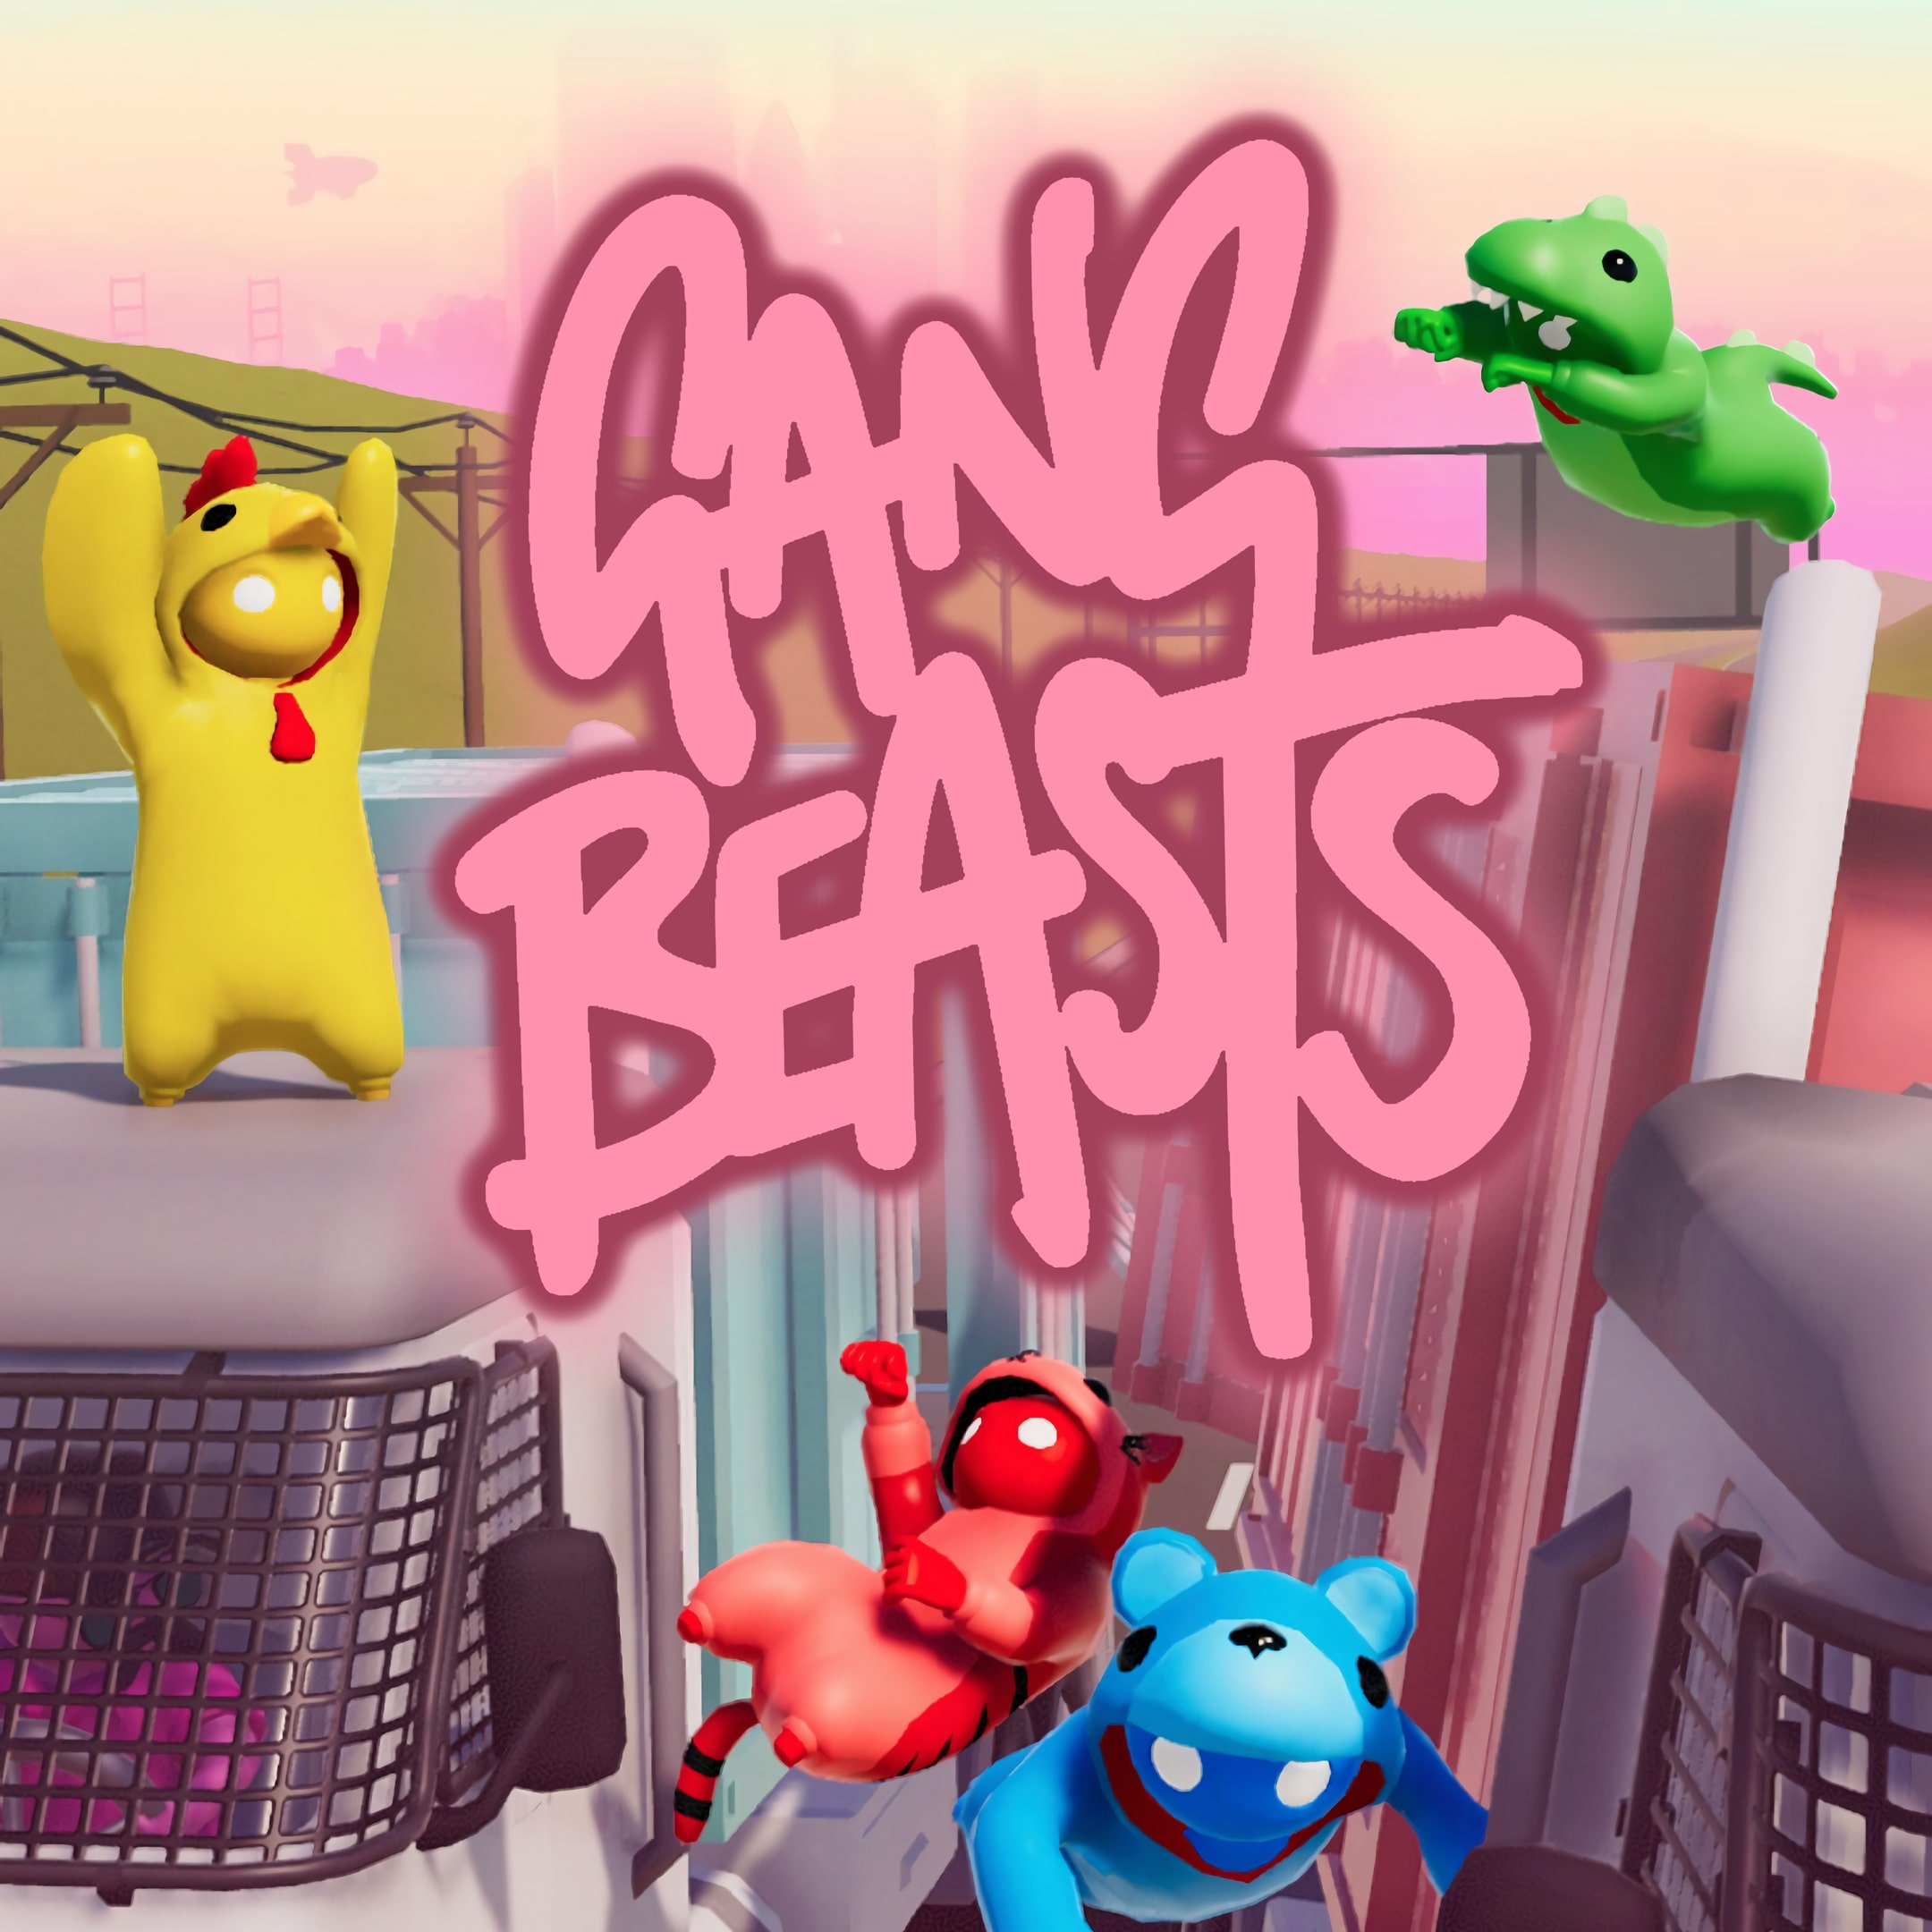 gang beasts controls for a controller